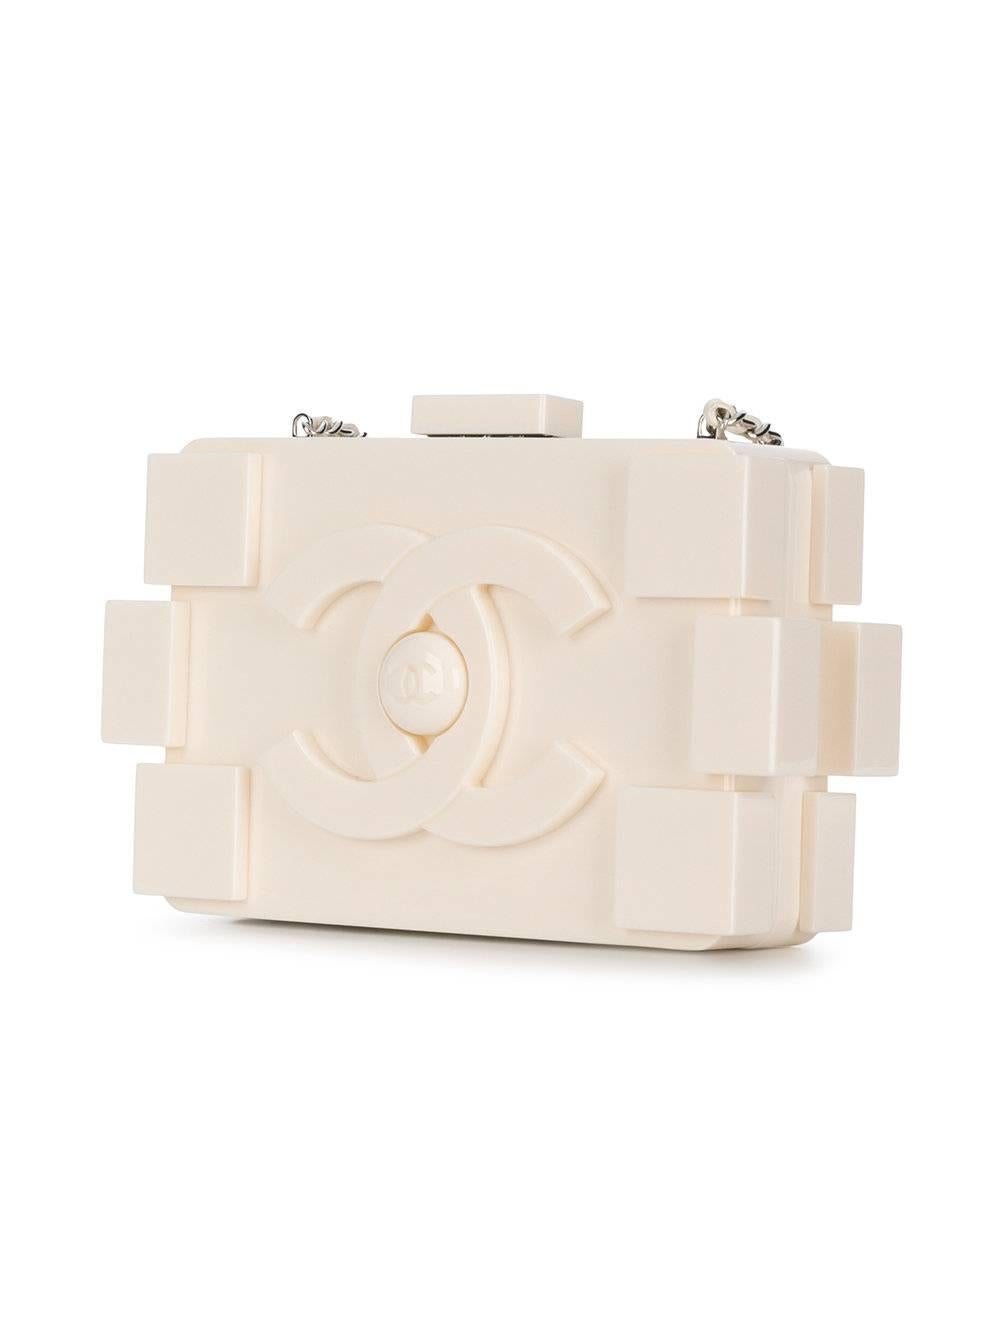 This Chanel Lego Brick Bag is super modern, yet elegant in its off-white tone. The bag features an internal zipped pocket, a top clasp fastening, a chain shoulder strap and is set off by its silver-tone hardware.

Please revert to images for